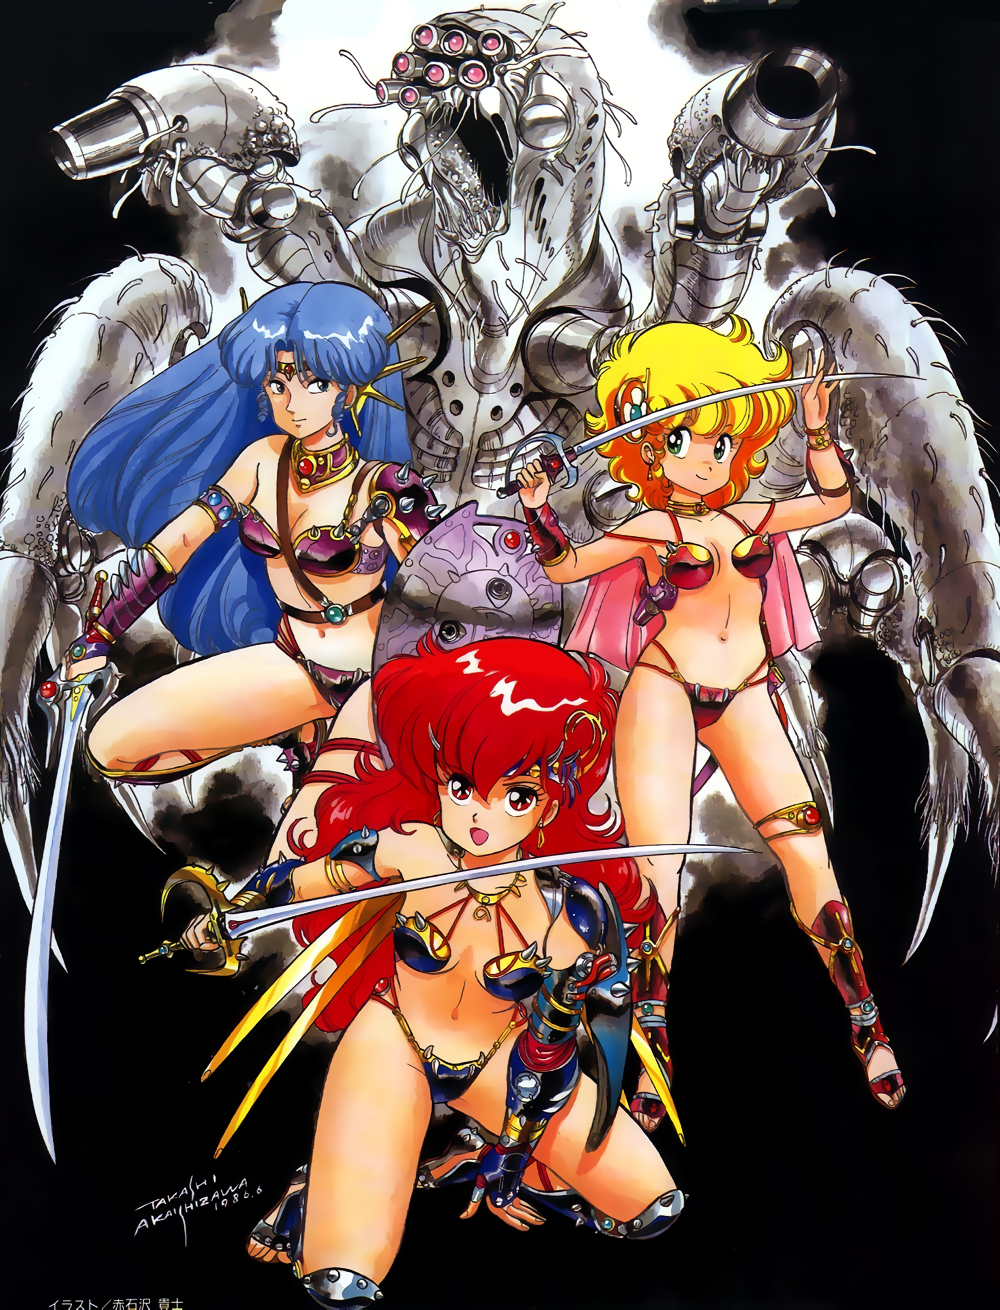 1980s_(style) 3girls akaishizawa_takashi armor bikini_armor blonde_hair blue_hair capelet daitokuji_biko earrings green_eyes highres holding holding_sword holding_weapon jewelry kotobuki_shiiko looking_at_viewer magami_eiko monster_girl multiple_girls navel official_art oldschool open_mouth ornament project_a-ko red_eyes redhead shield smile sword thighlet vambraces weapon